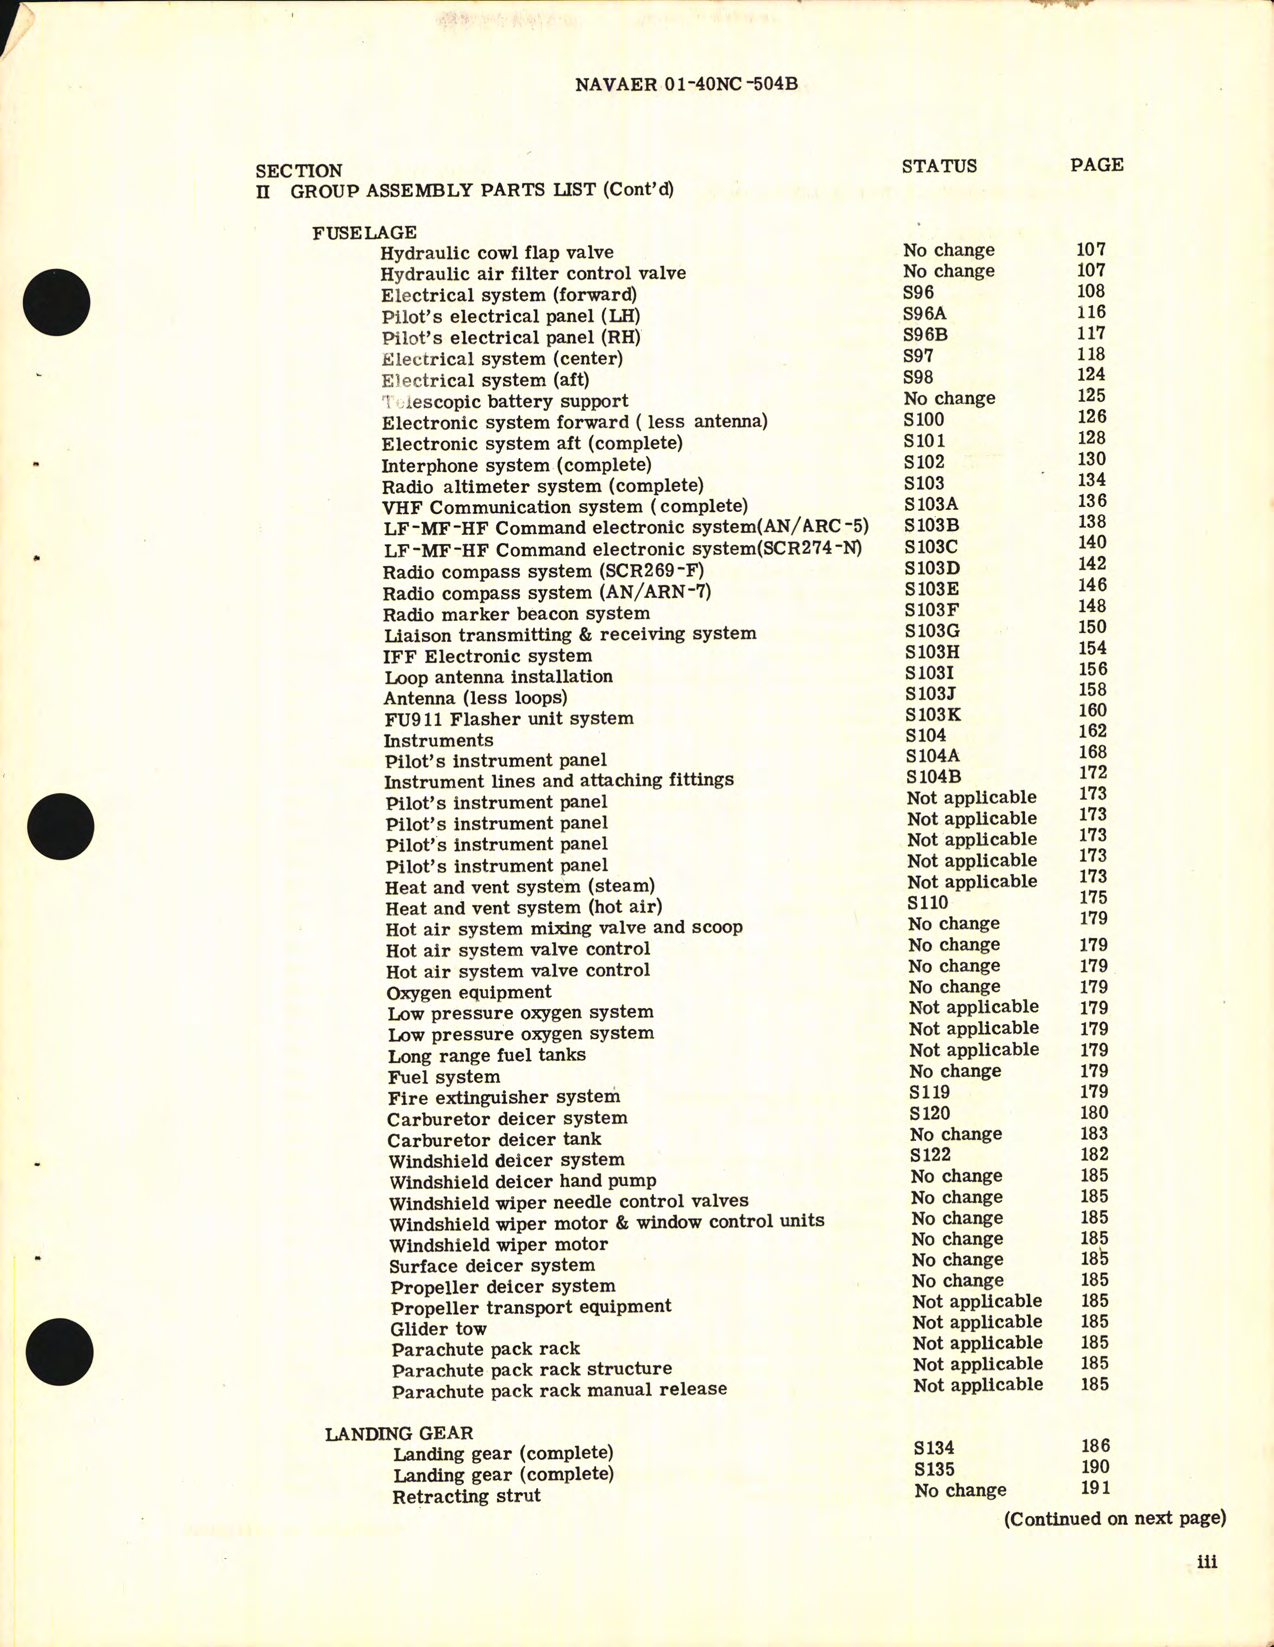 Sample page 5 from AirCorps Library document: Supplemental Parts Catalog for Navy Models R4D-5 Airplanes Modified by Curtiss-Wright